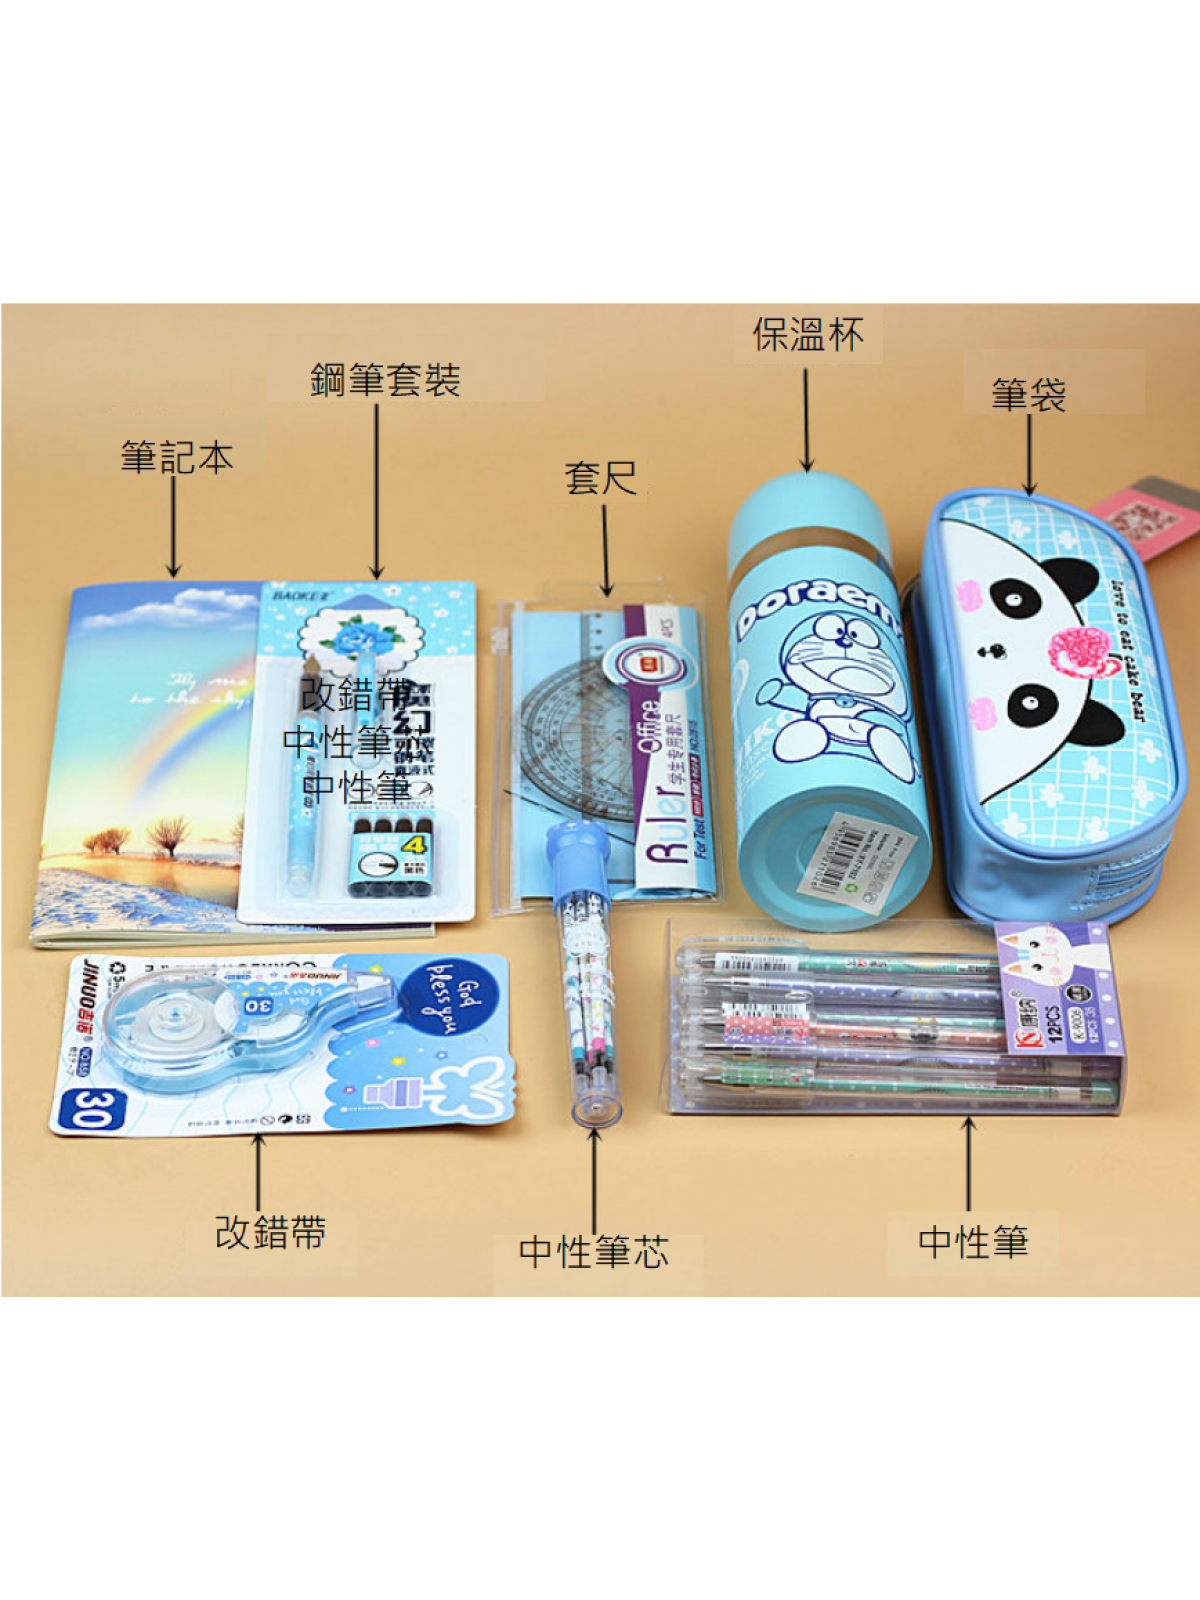 http://www.skynetcityhk.com/image/cache/catalog/products/Stationery/Gift%20set/gift%20set%20A/1-1200x1600.png